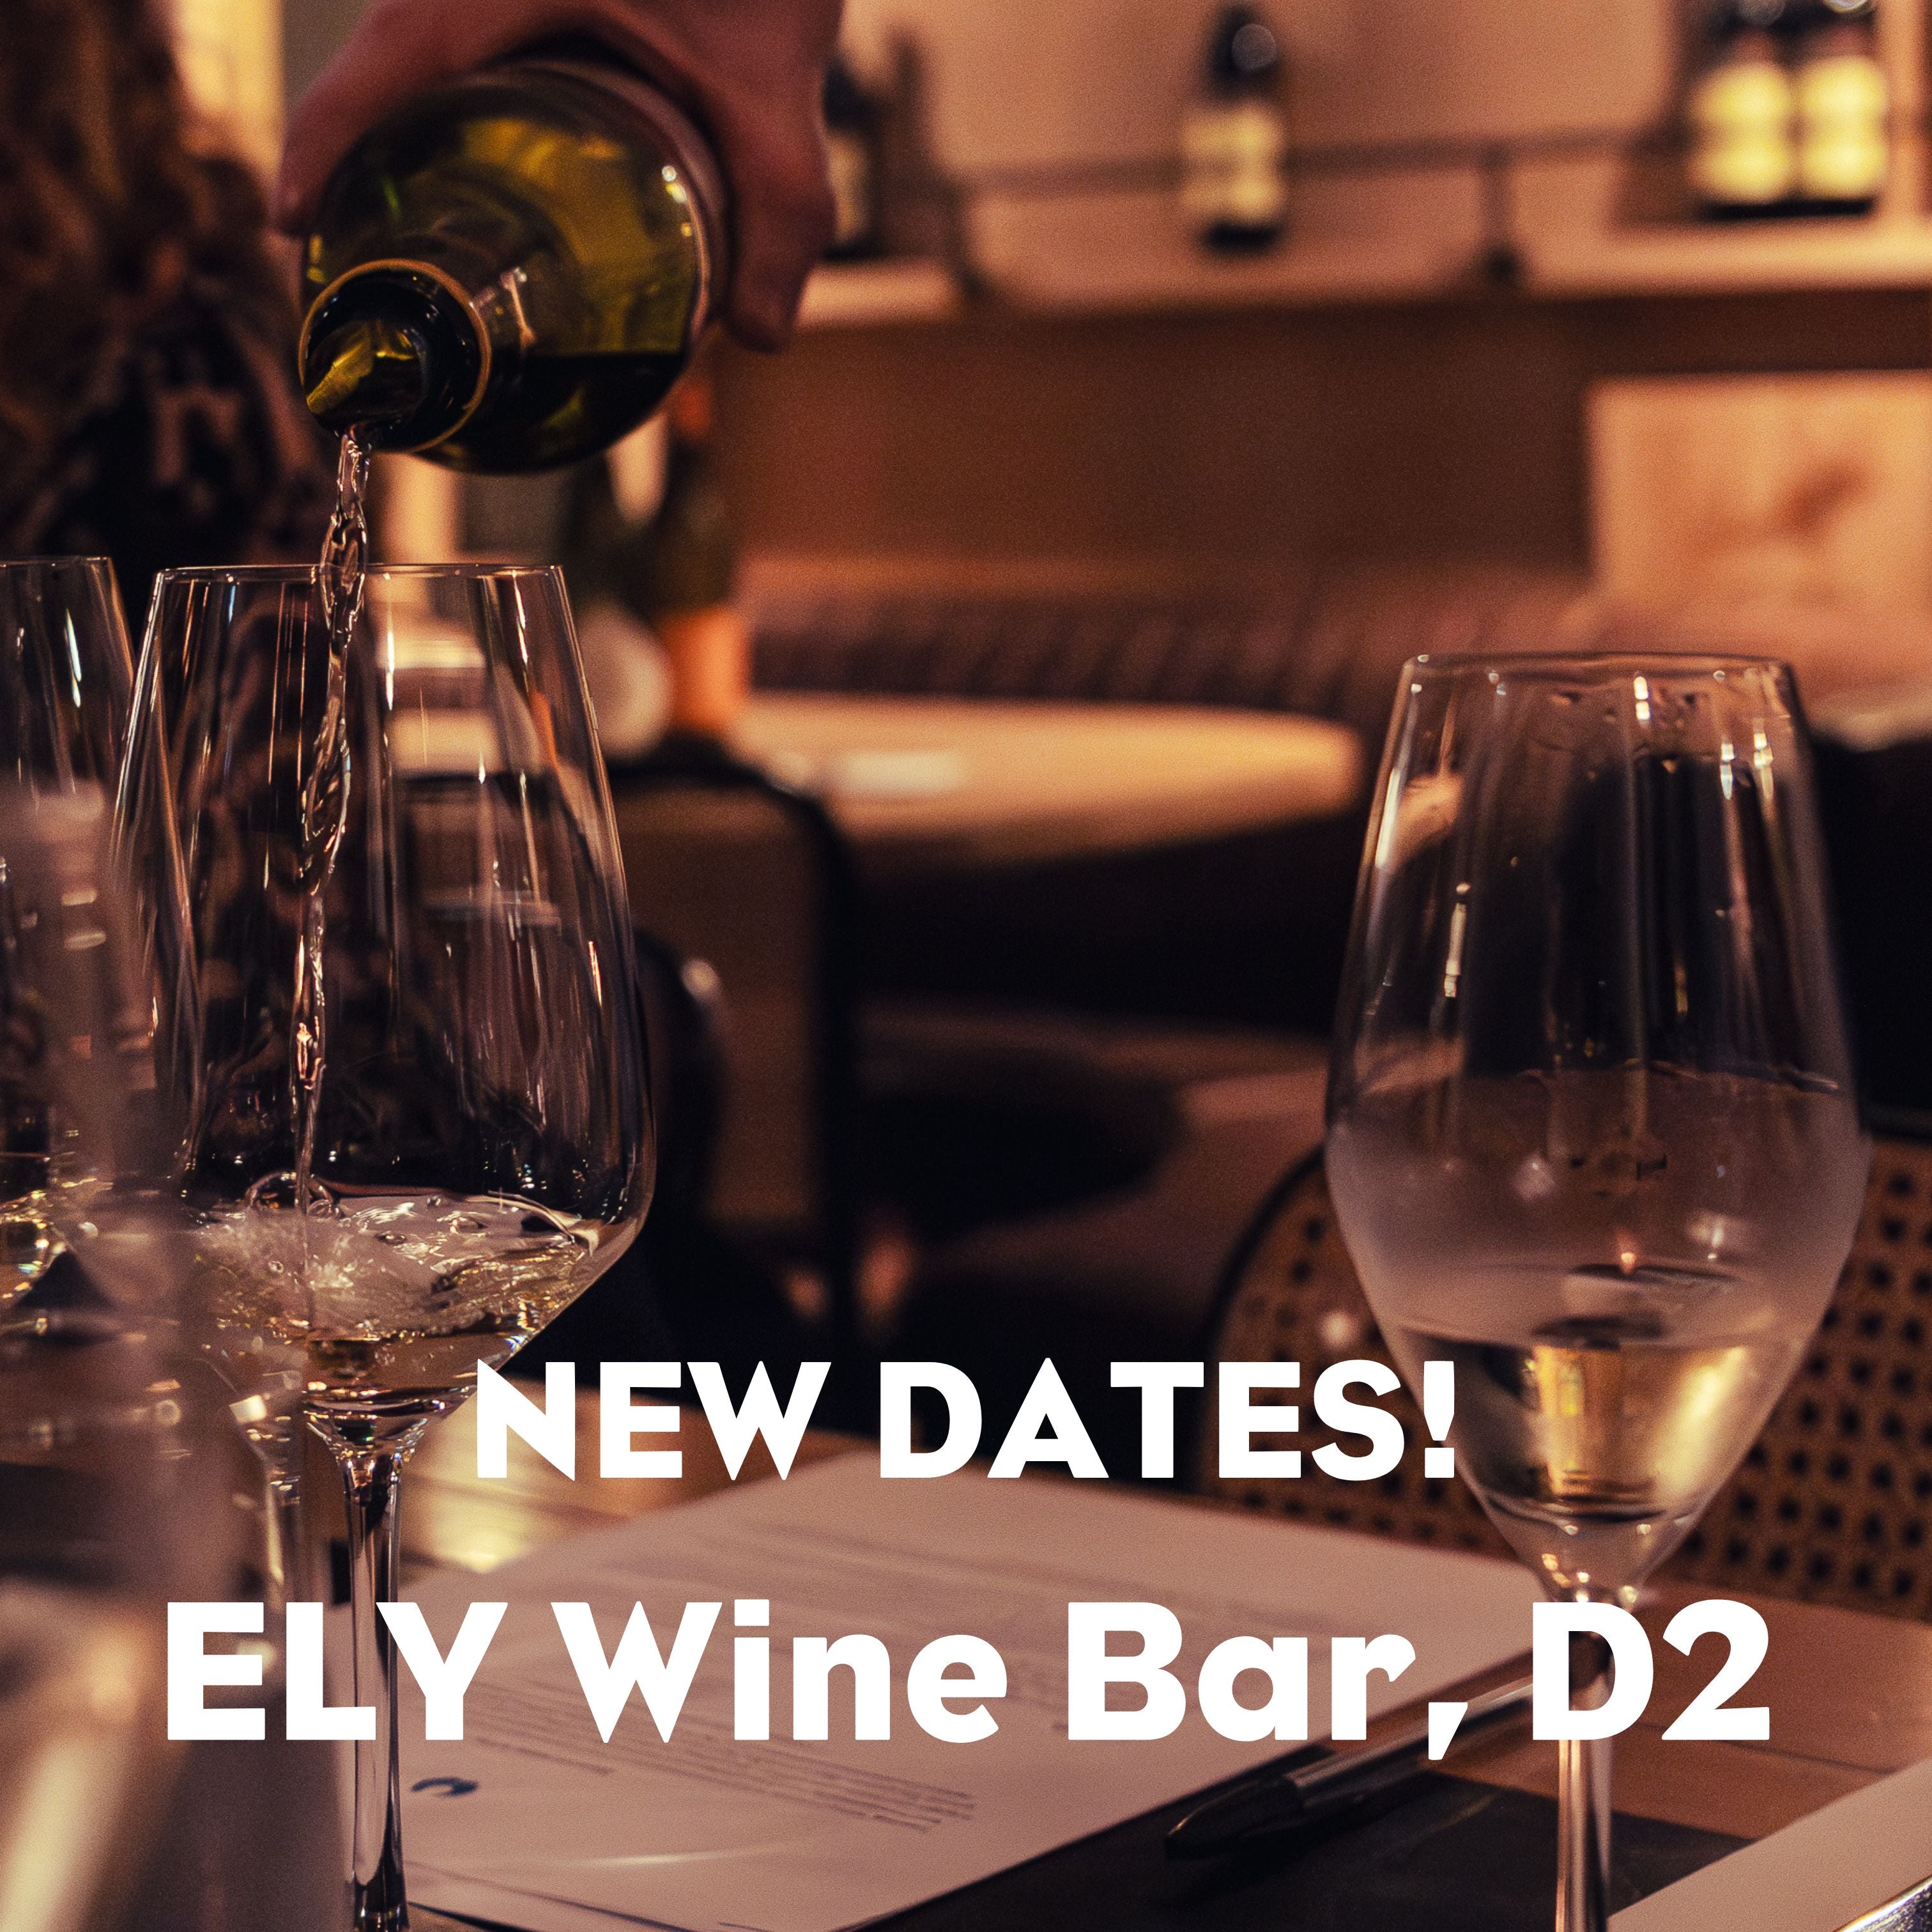 Wine Wednesdays at ELY Wine Bar - NEW SUMMER DATES ADDED